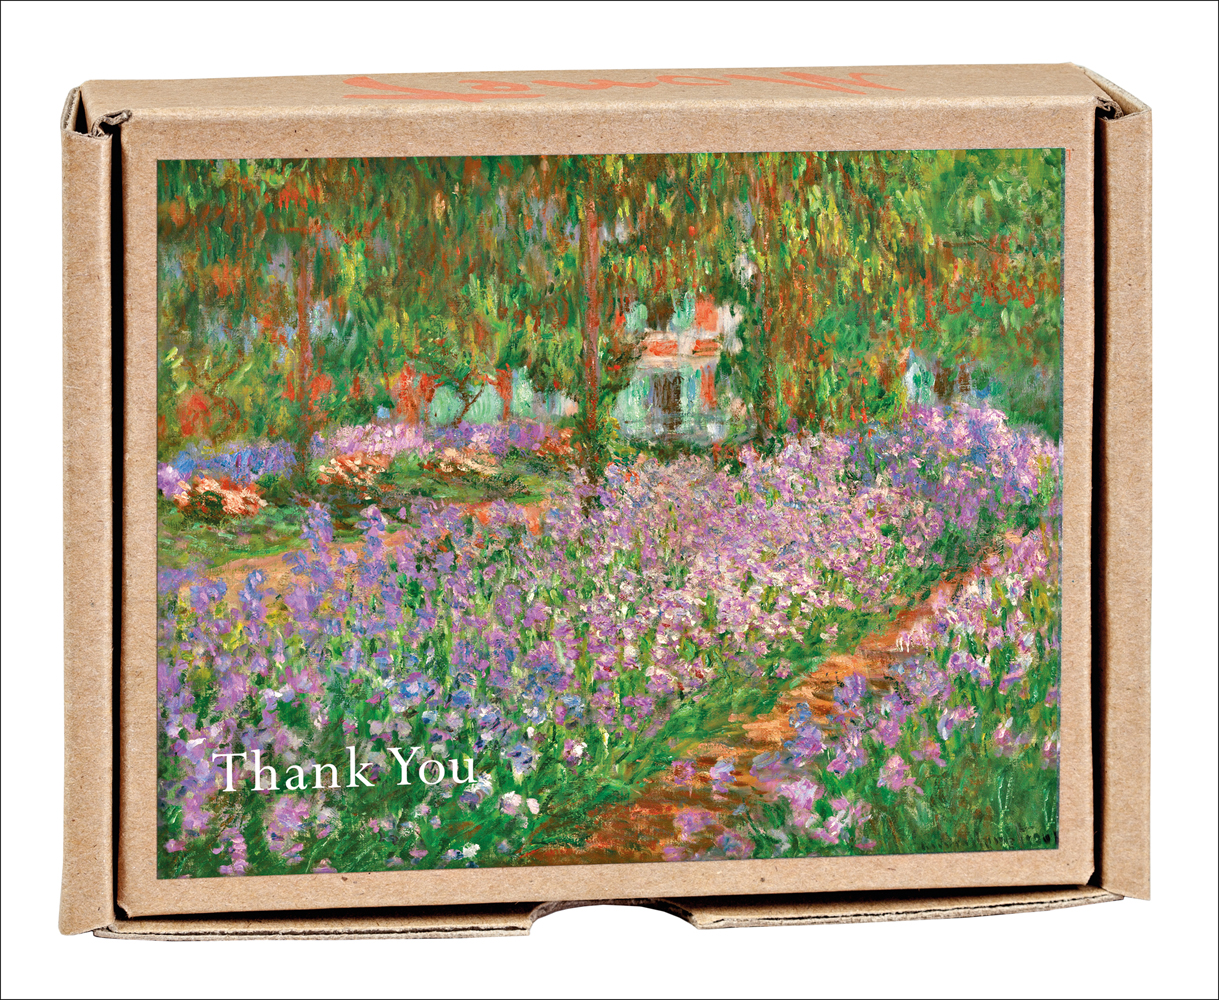 Claude Monet's painting 'The Artist's Garden at Giverny', on notecard box, by teNeues' Stationery.